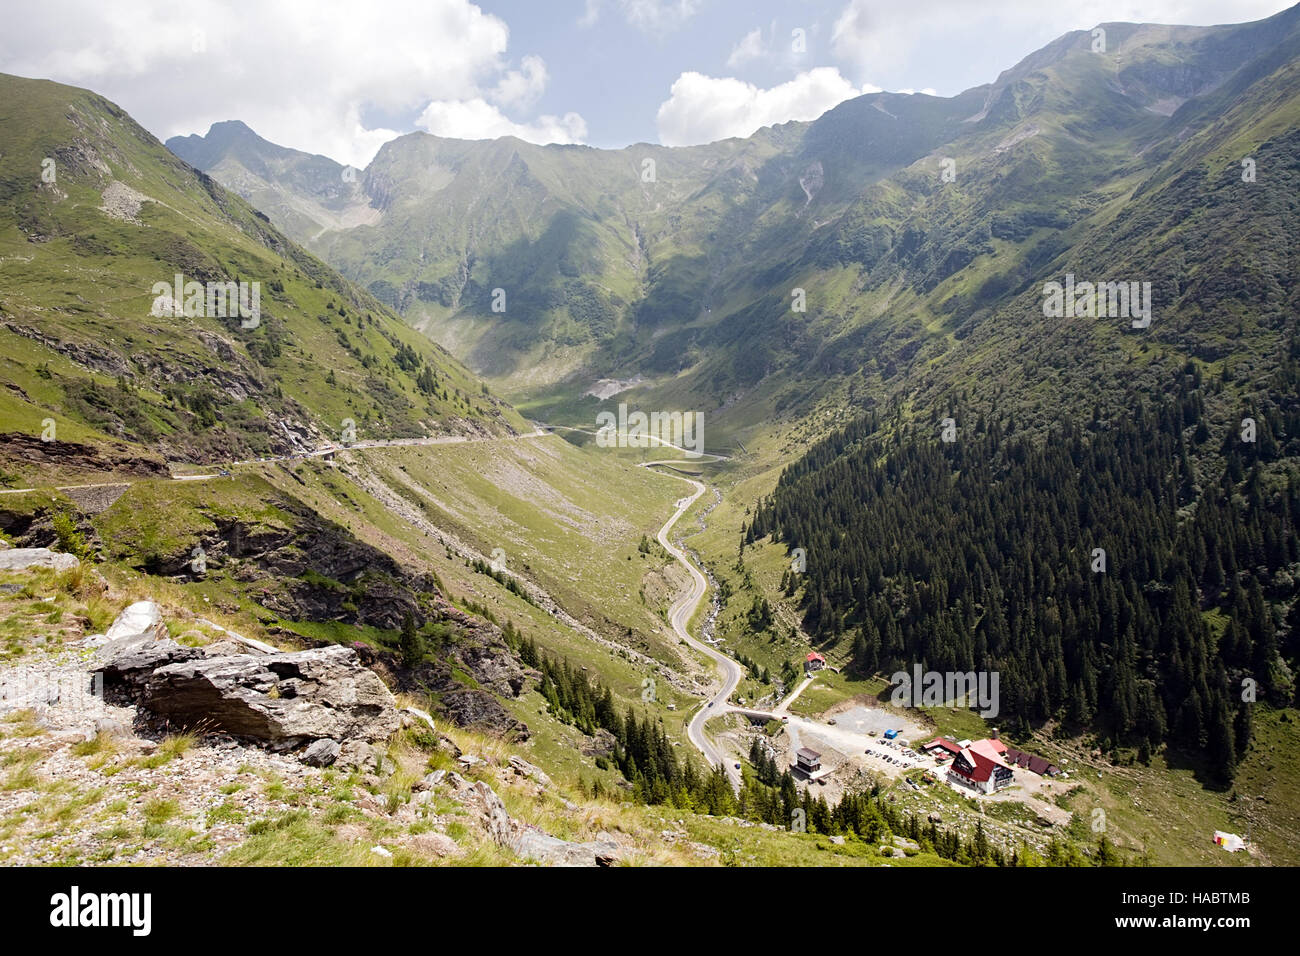 summer mountain landscape with winding highway road, Romania Stock Photo